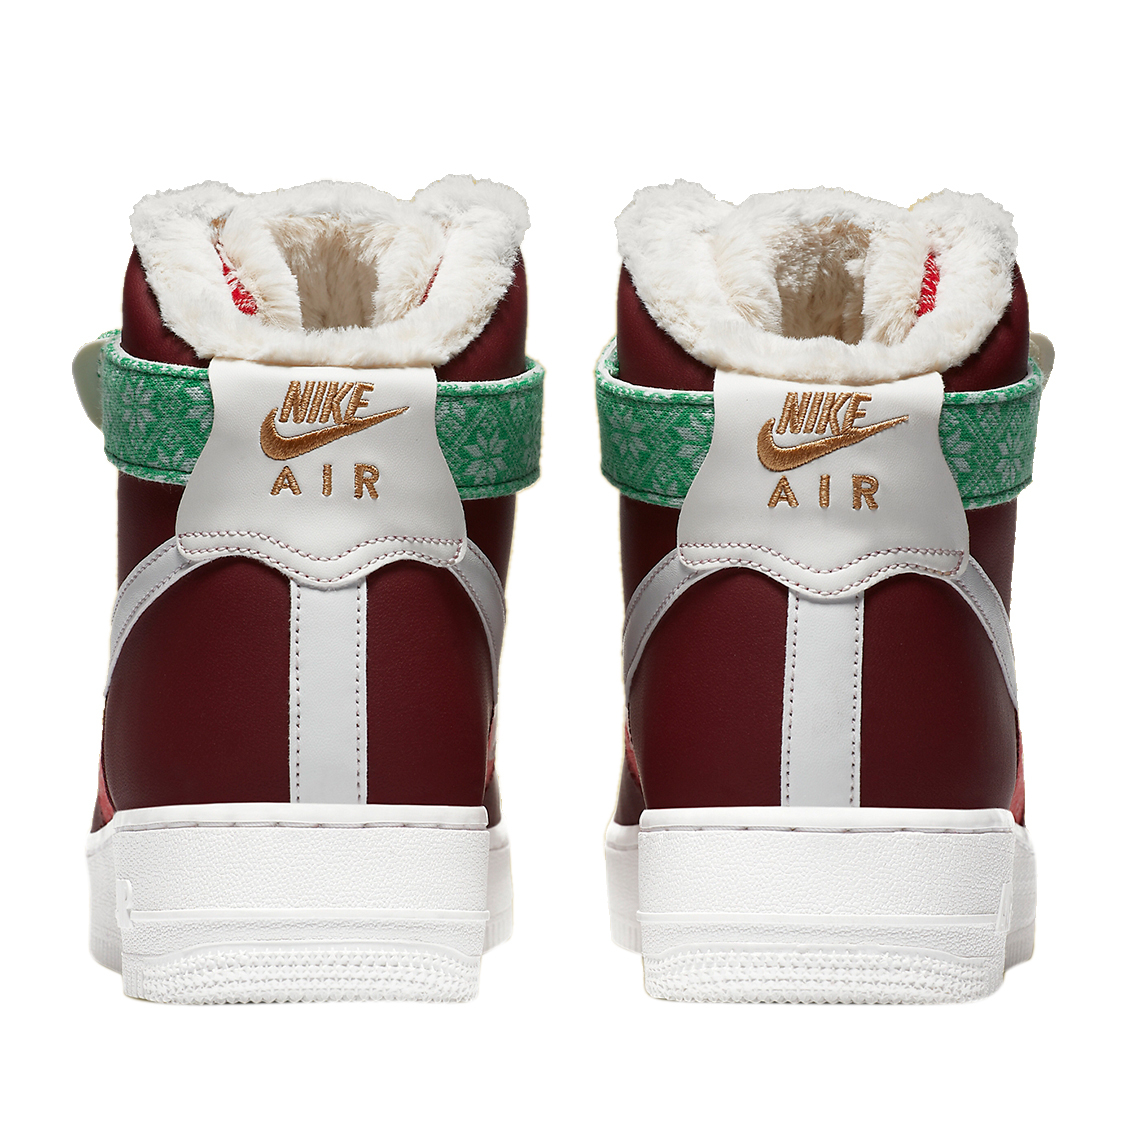 Nike Air Force 1 High Christmas Sweater 2020 DC1620-600